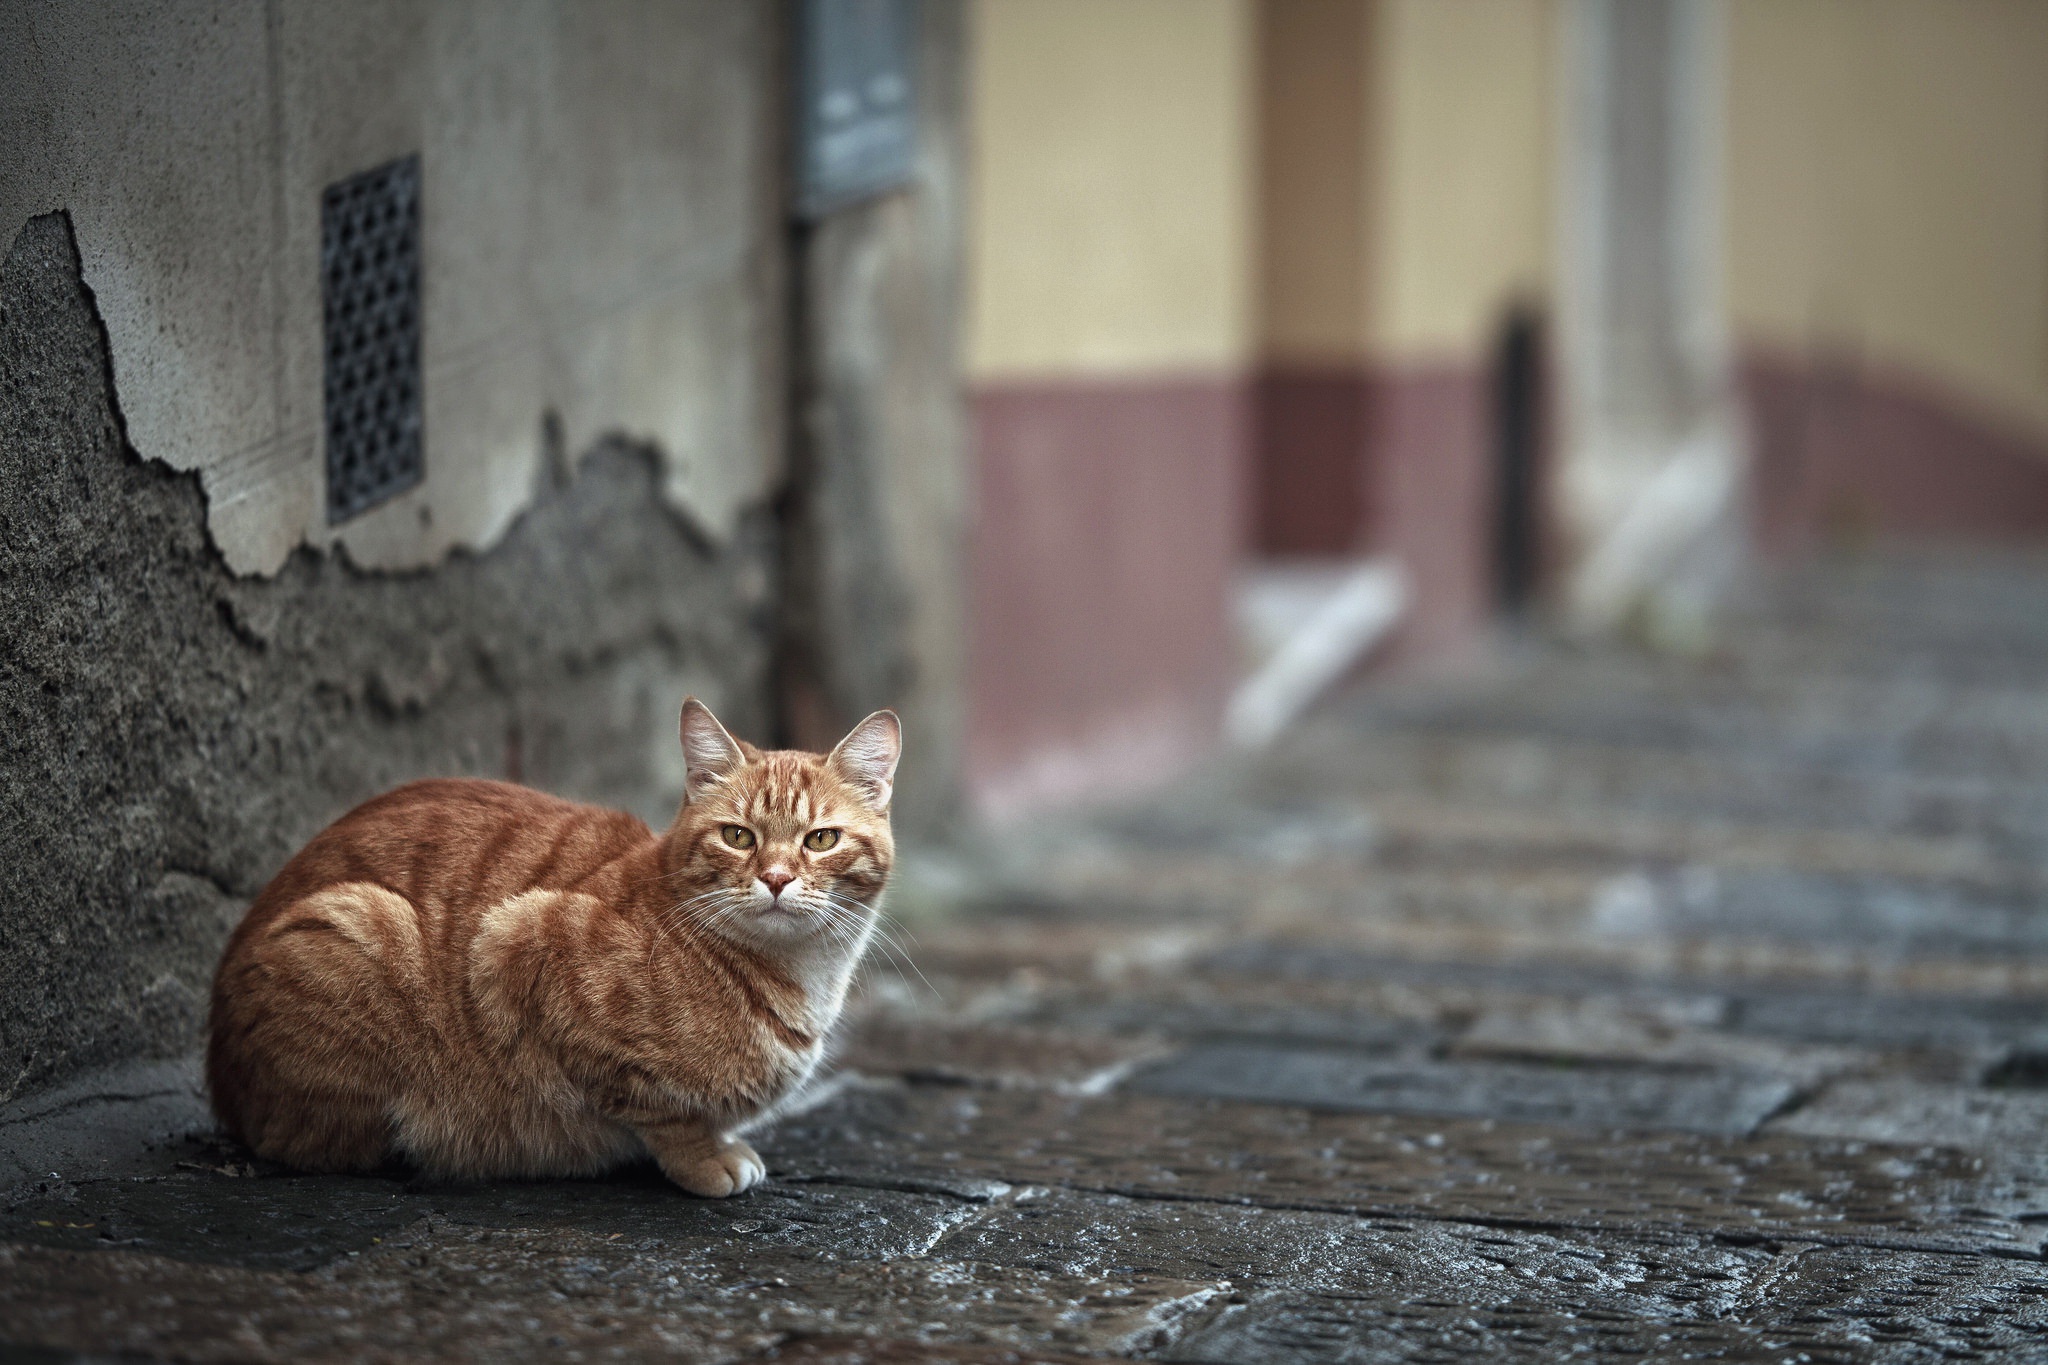 General 2048x1365 animals cats outdoors urban